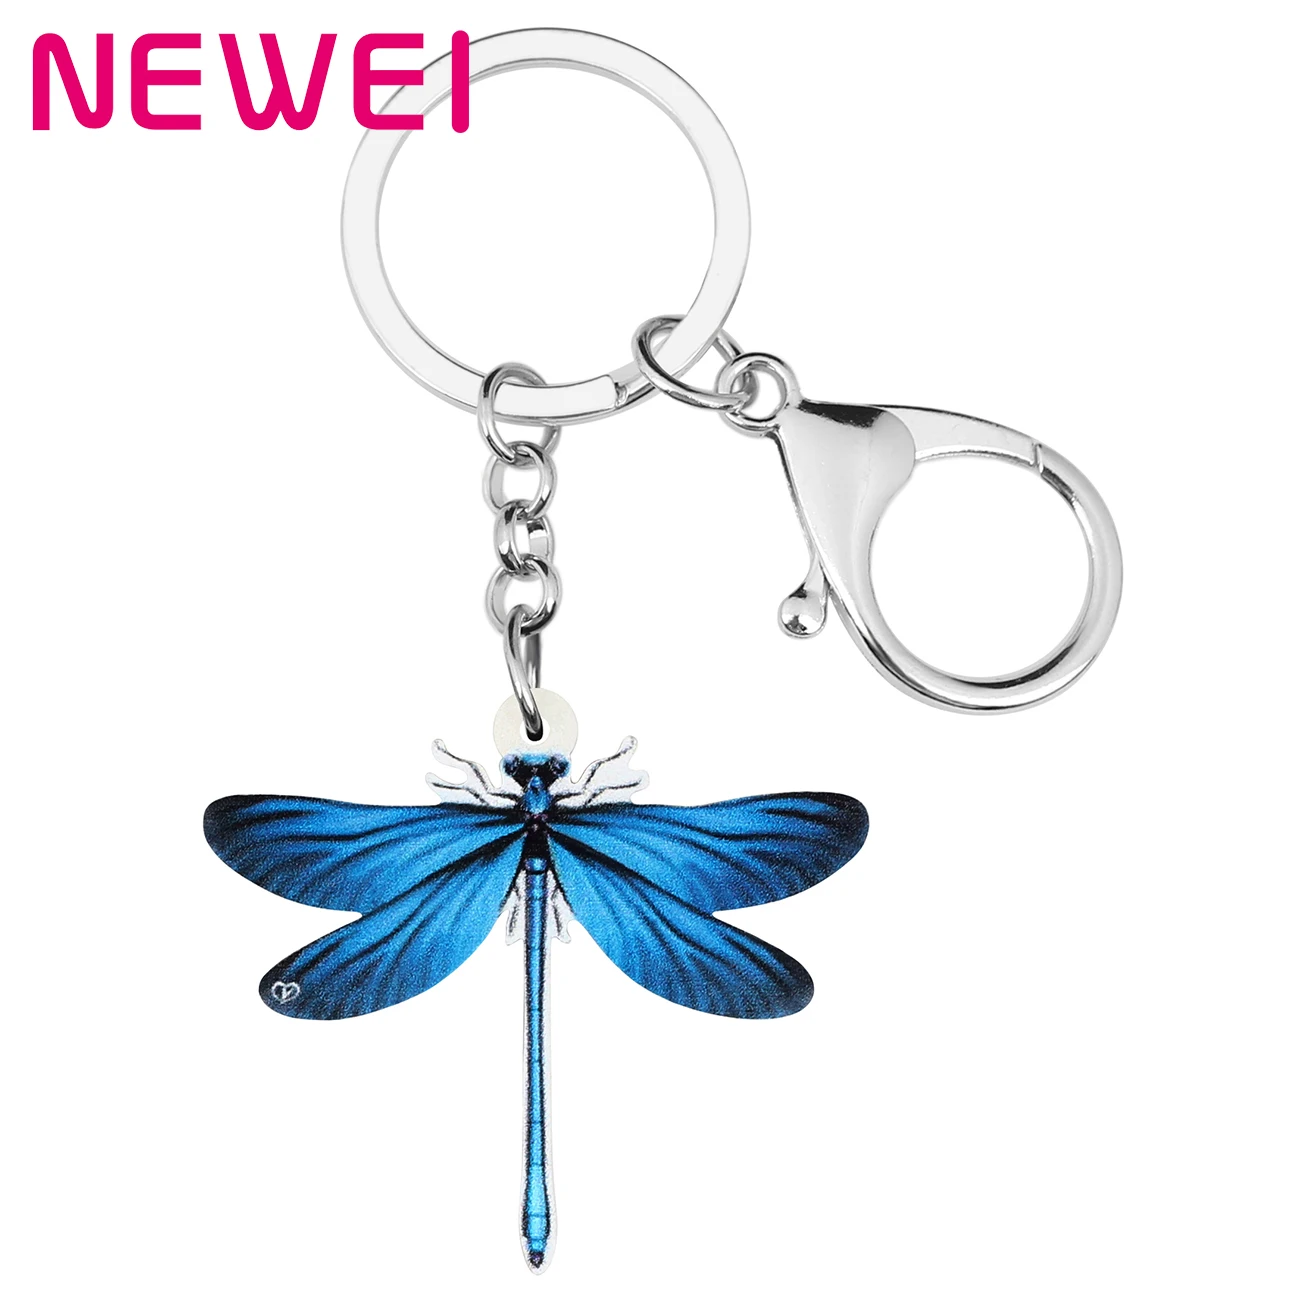 

Newei Acrylic Blue Dragonfly Keychains Big Insect Animal Keyring Jewelry For Women Kids Girlfriends Spring Trendy Gift Accessory